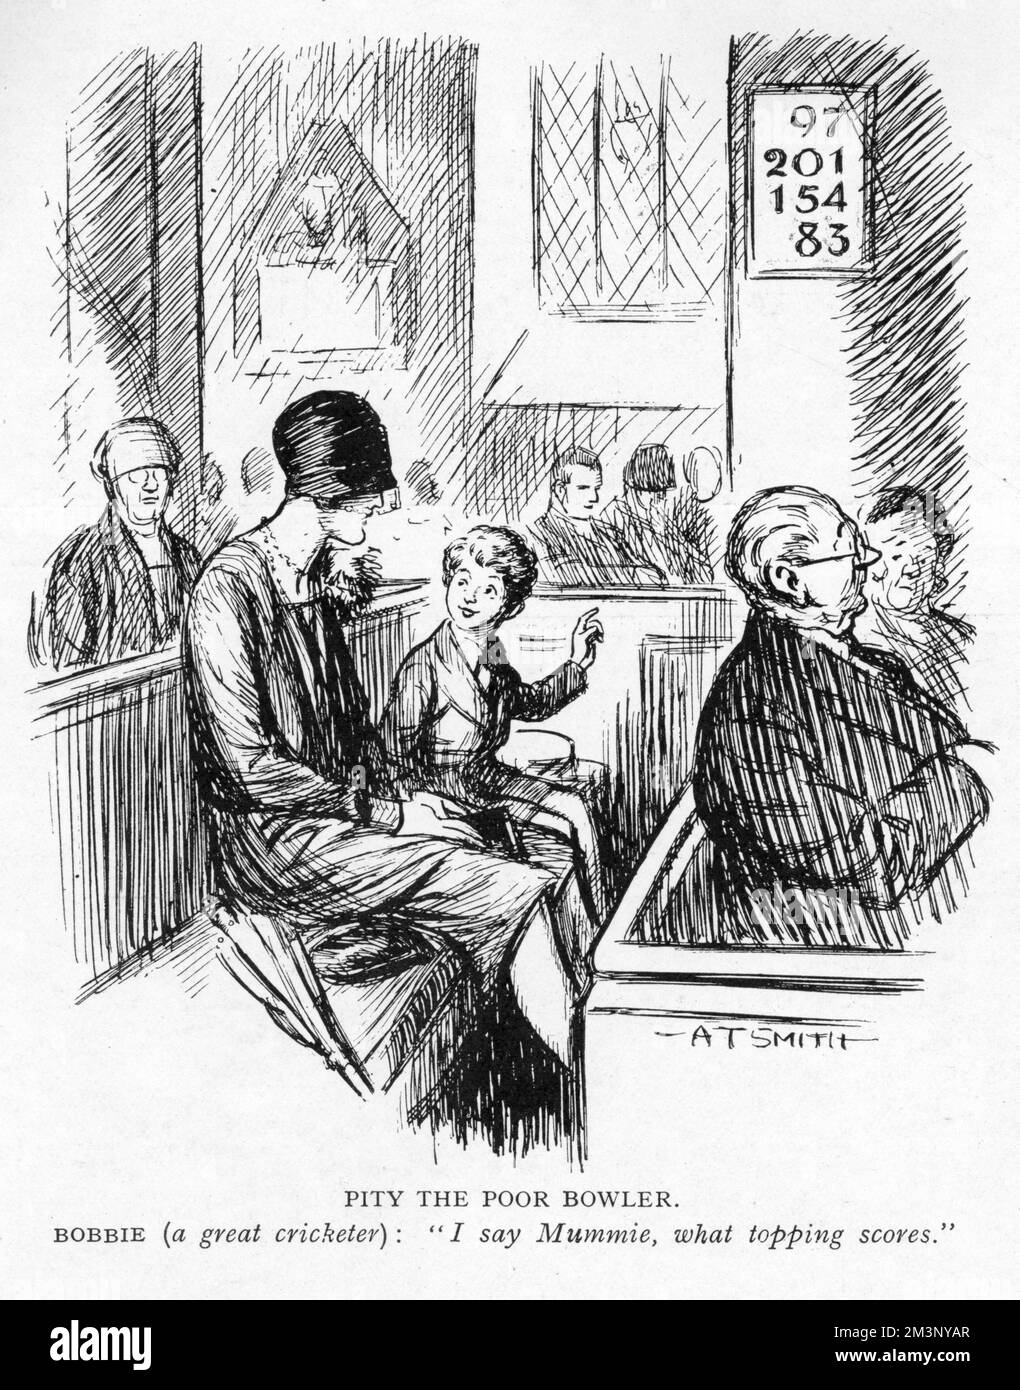 Humorous cartoon showing a small boy in church with his mother, pointing out the hymn numbers on the wall, and mistaking them for cricket scores.    Bobbie ( a great cricketer): &quot;I say Mummie, what topping scores.&quot;     Date: 1928 Stock Photo